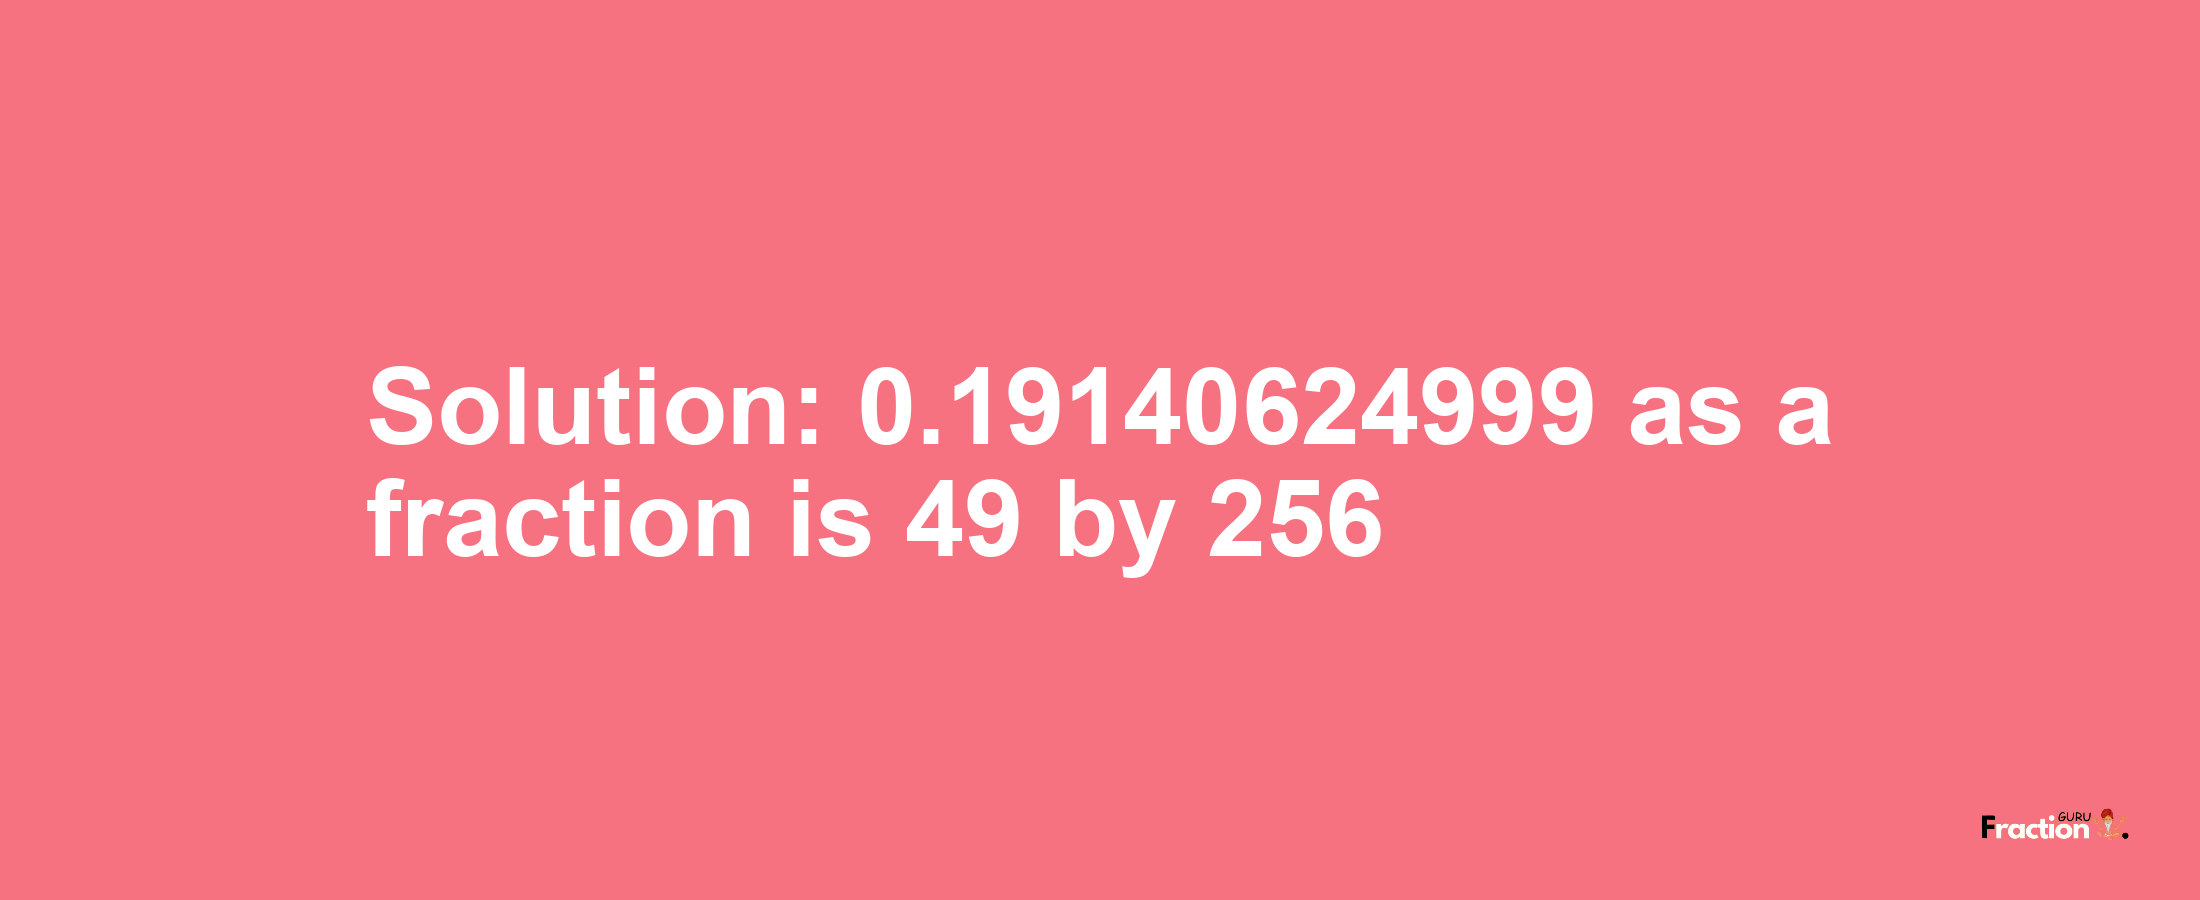 Solution:0.19140624999 as a fraction is 49/256